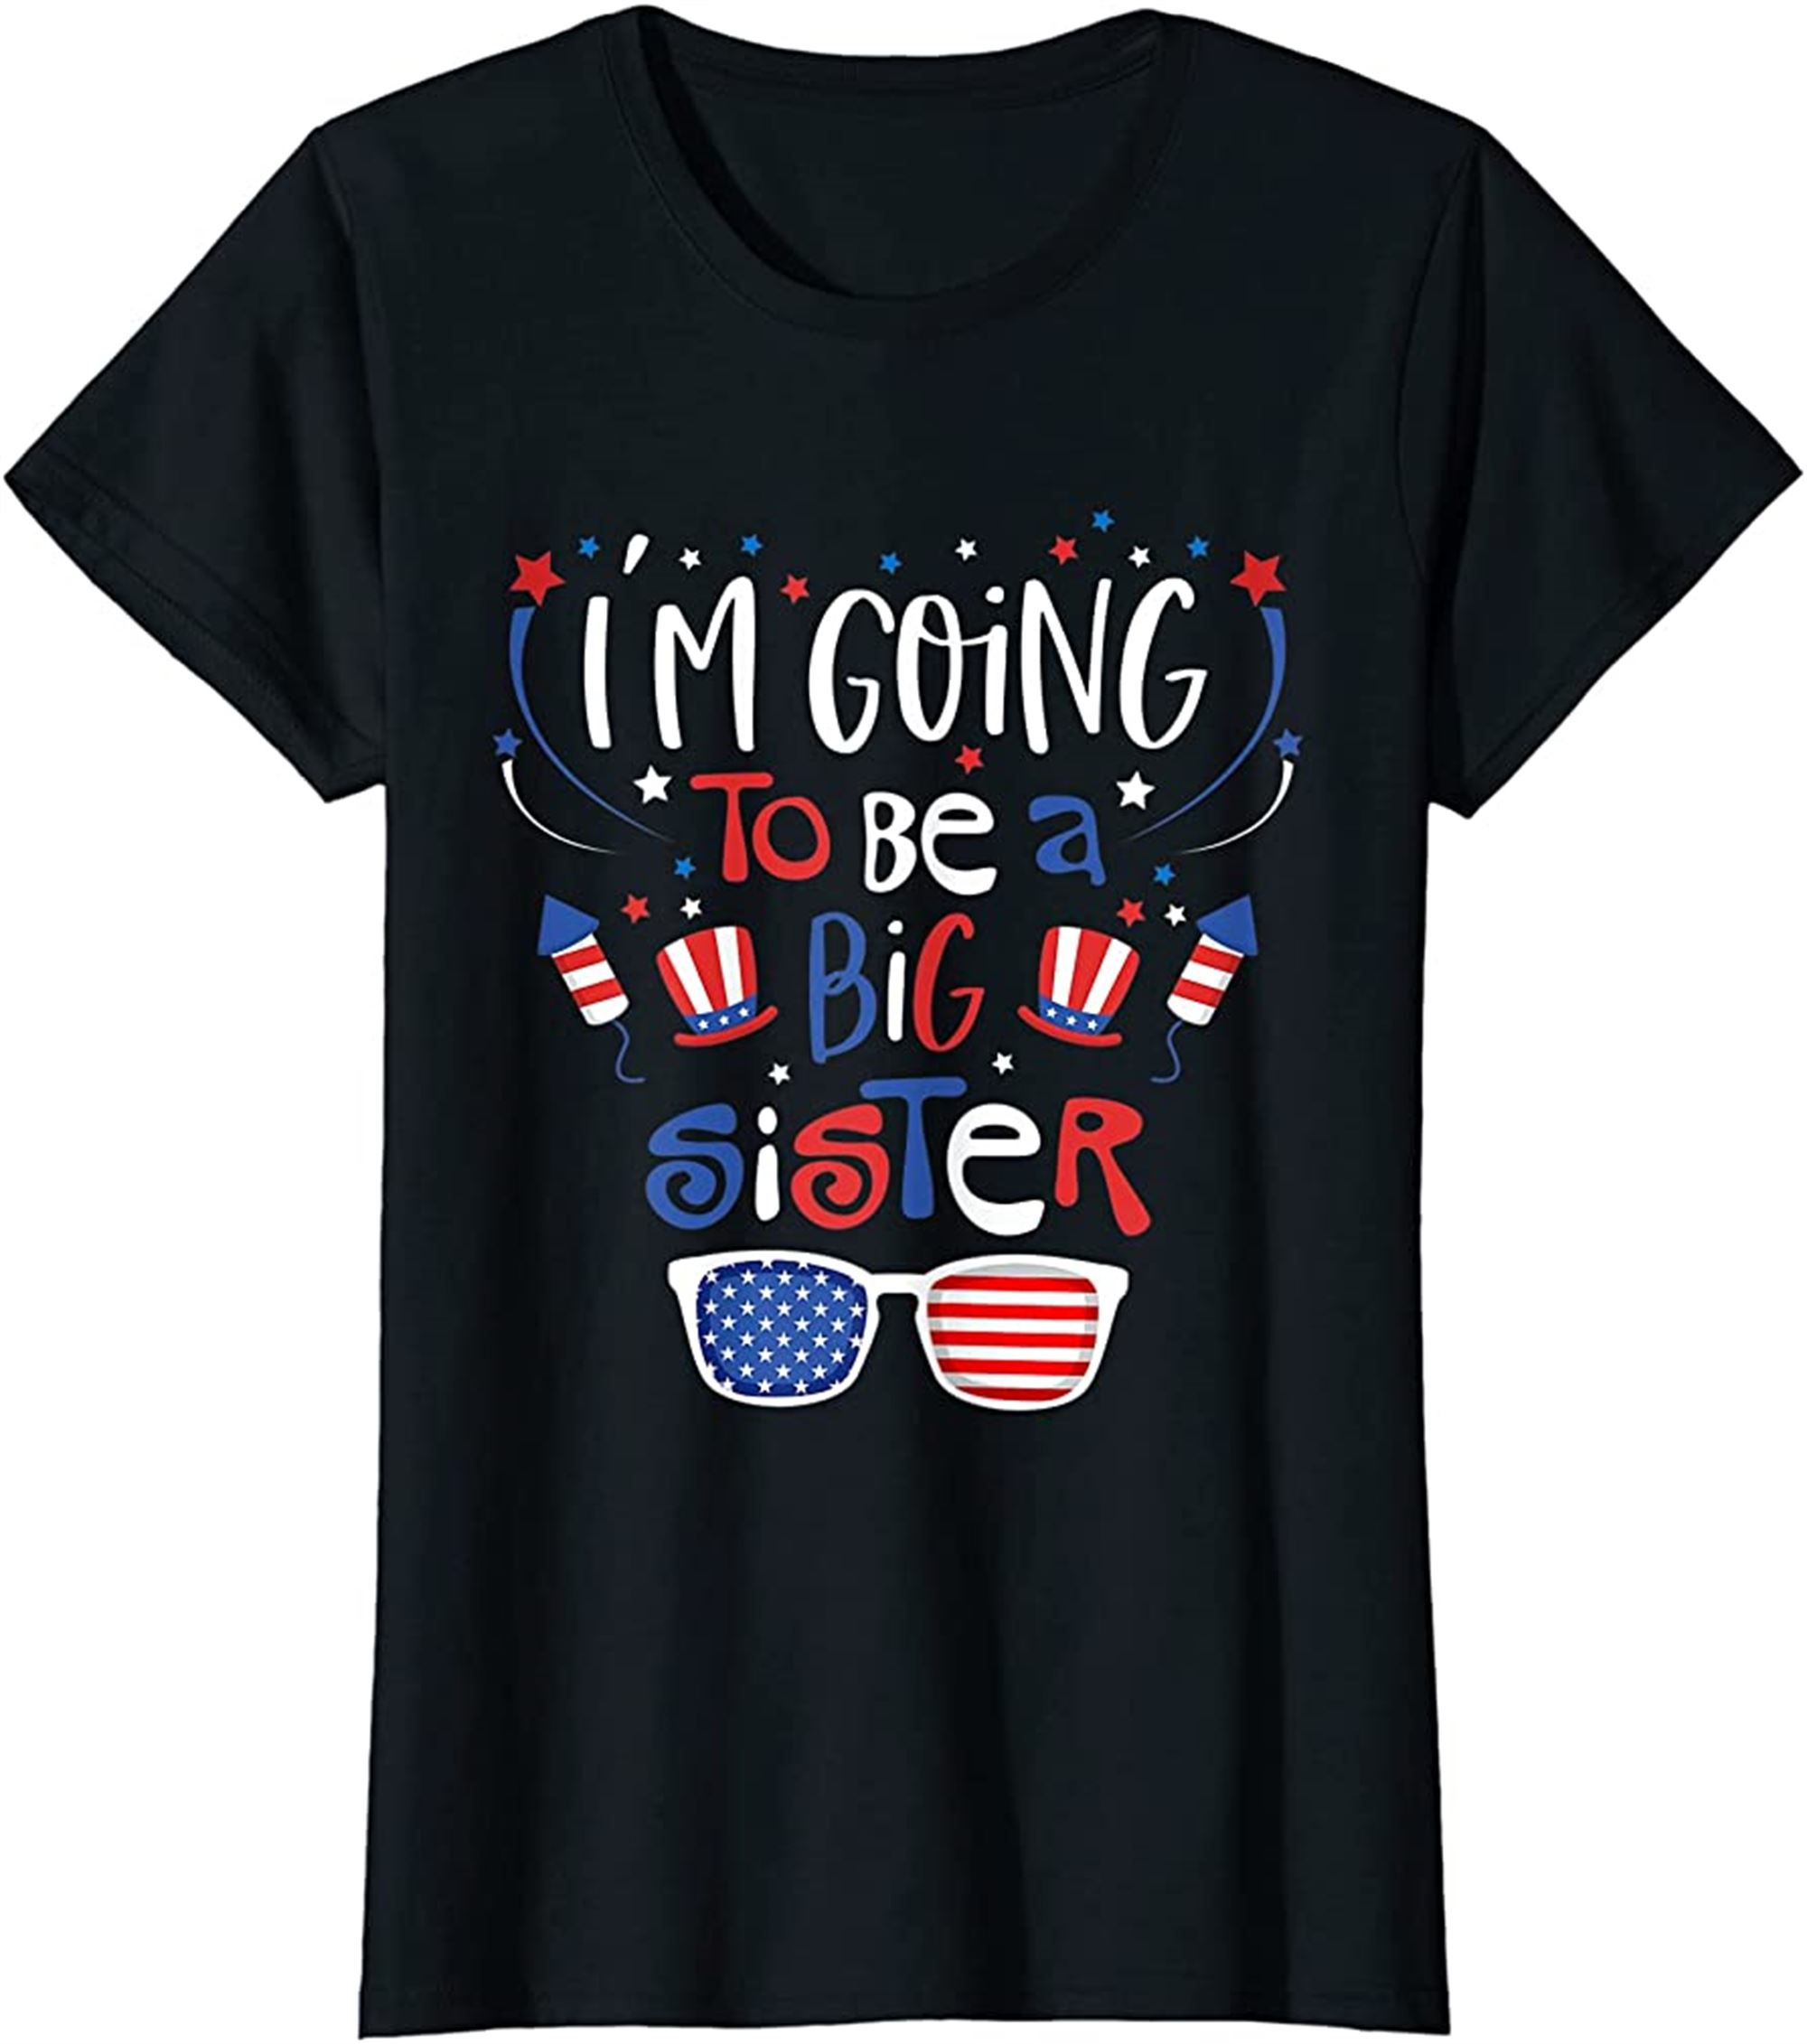 Im Going To Be A Big Sister 4th Of July Pregnancy Reveal T-shirt Full Size Up To 5xl